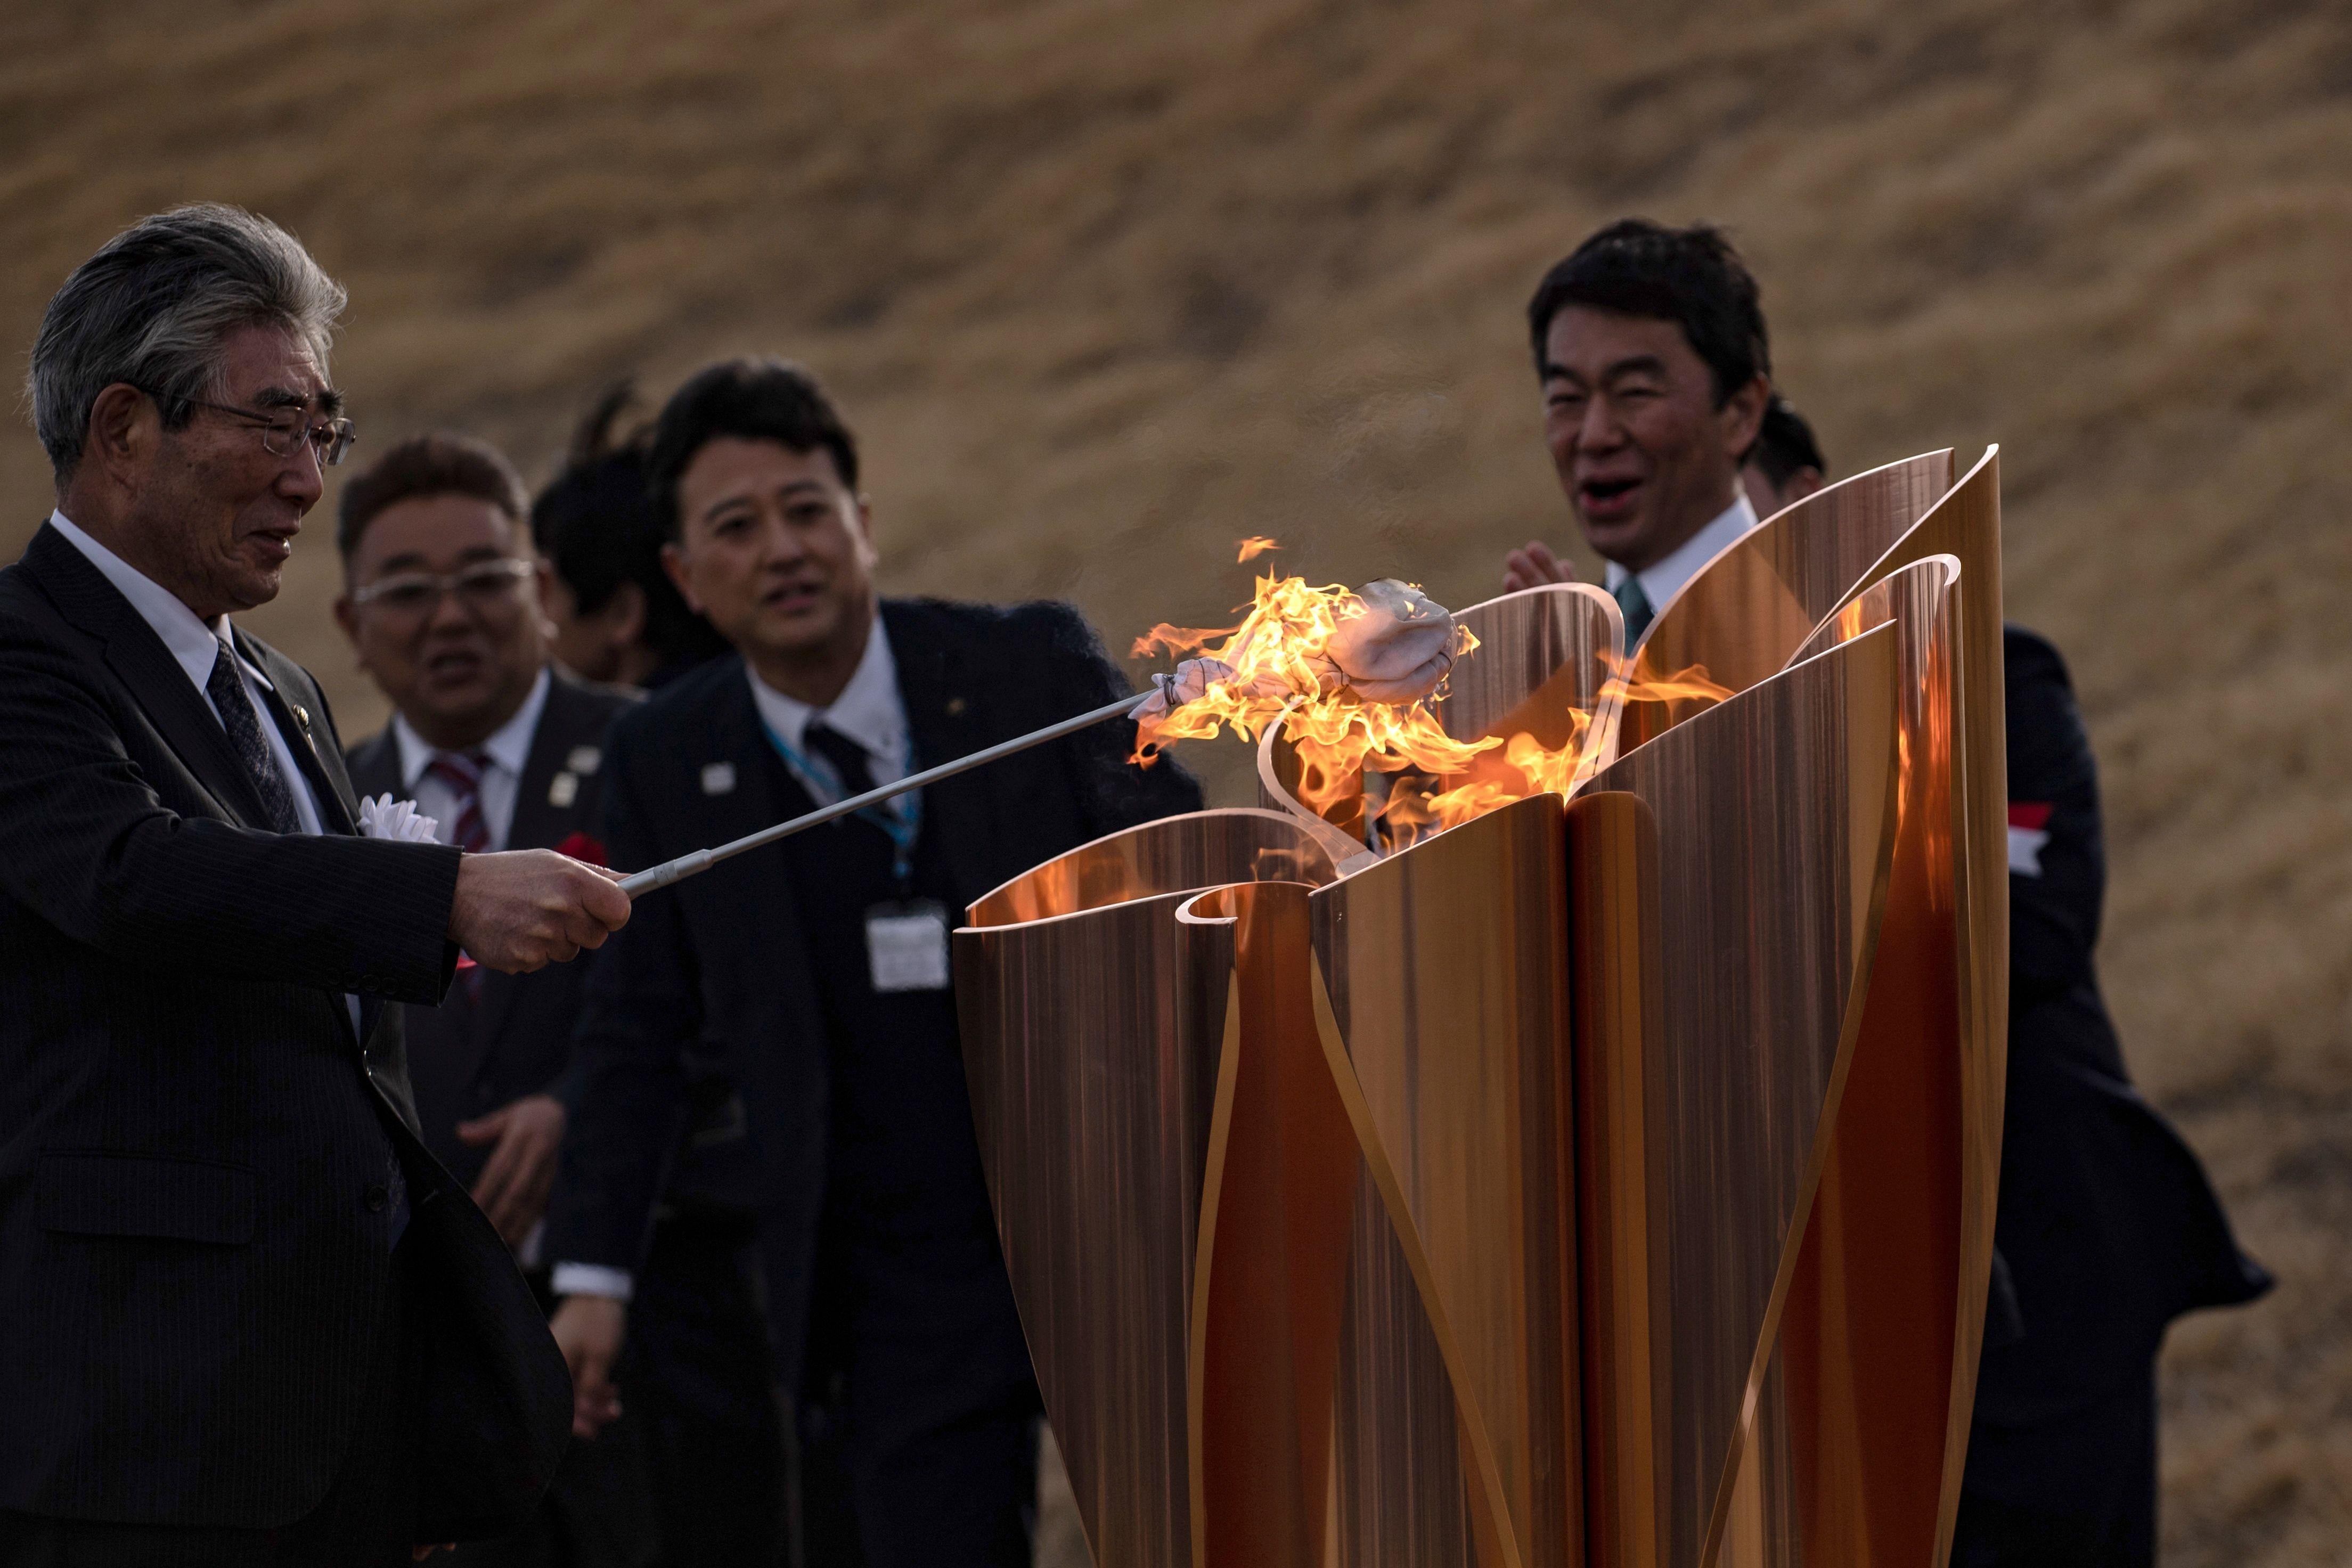 The Tokyo 2020 Olympic flame is displayed being lit by men in suits. 